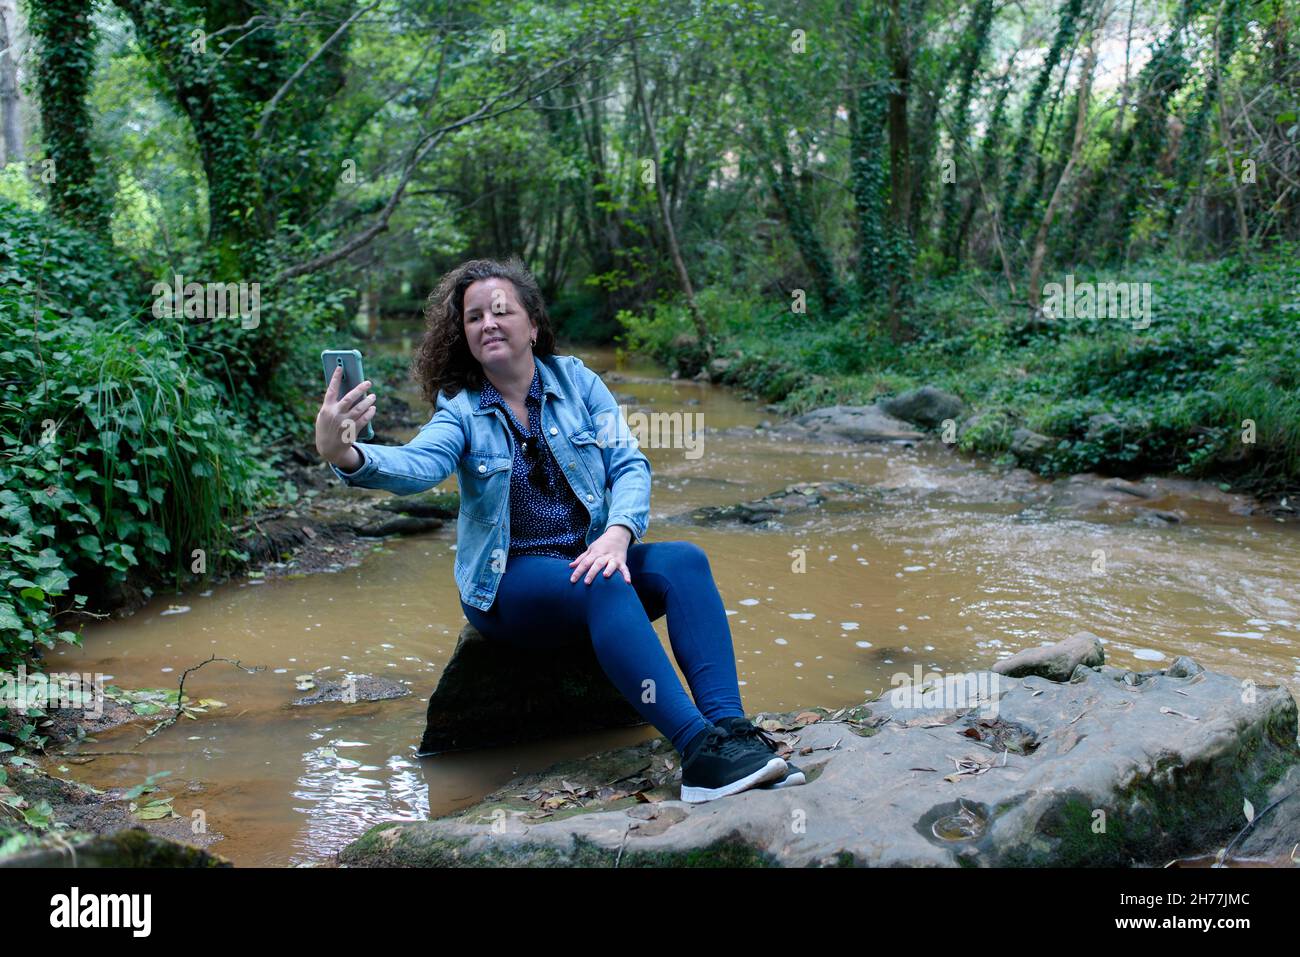 Woman sitting taking a selfie next to a stream running through a gallery forest. Stock Photo